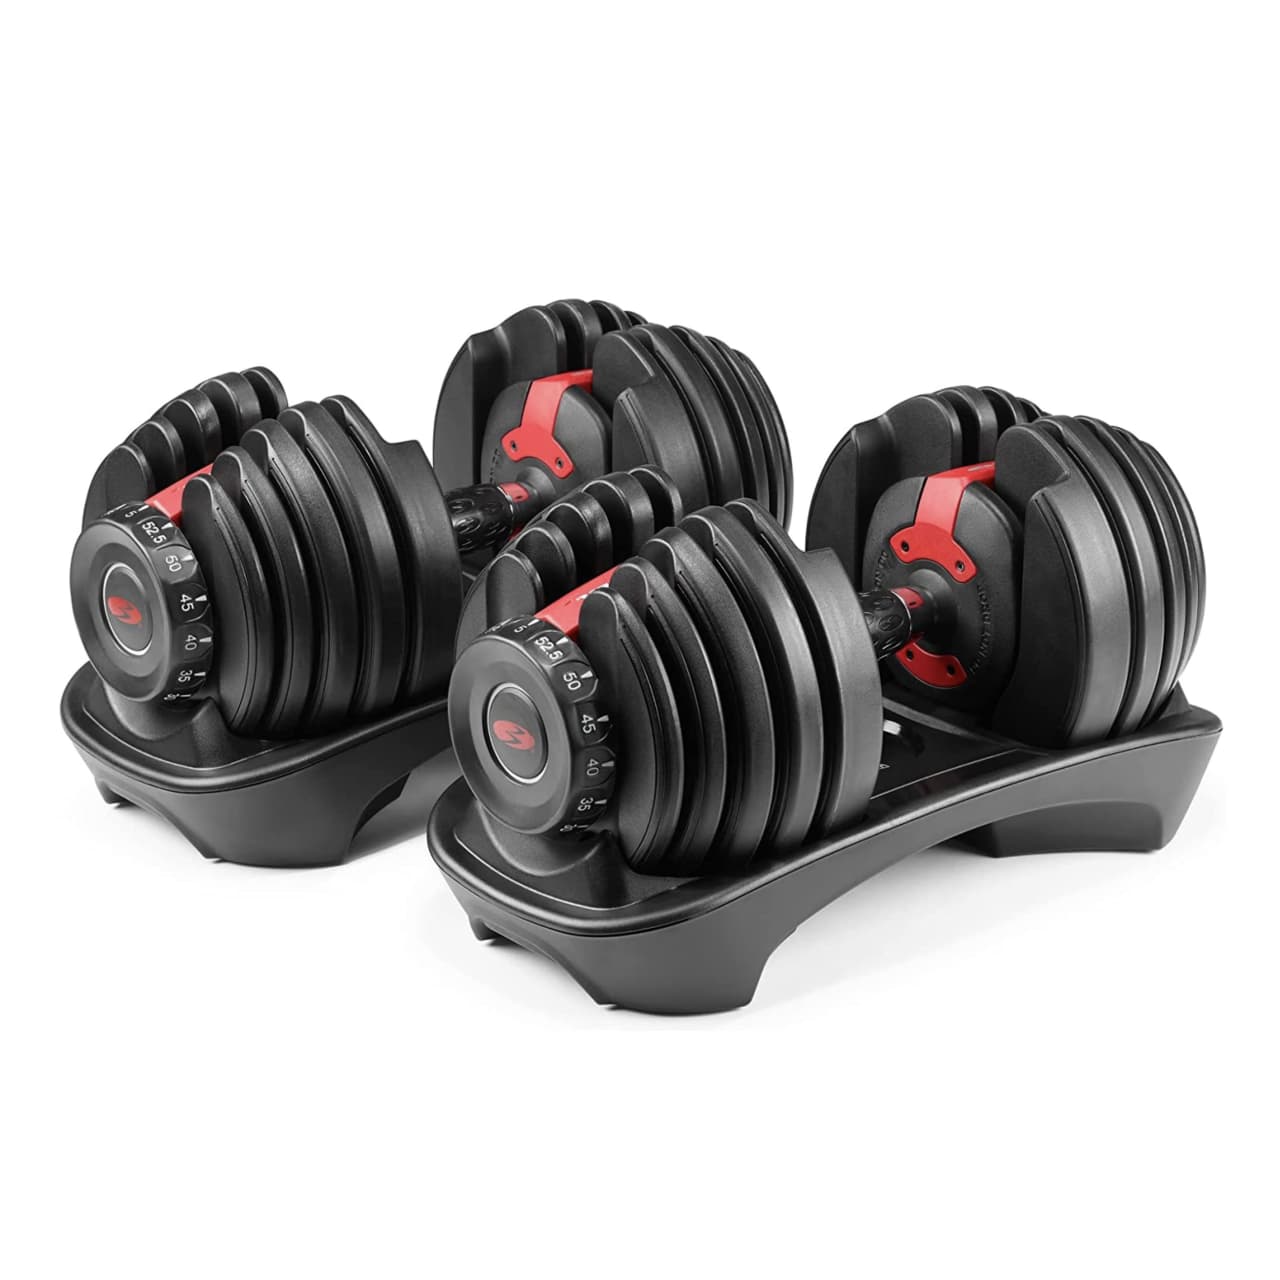 Pair of Core Home Fitness Adjustable Dumbbell Weights Set 5-50 LB 